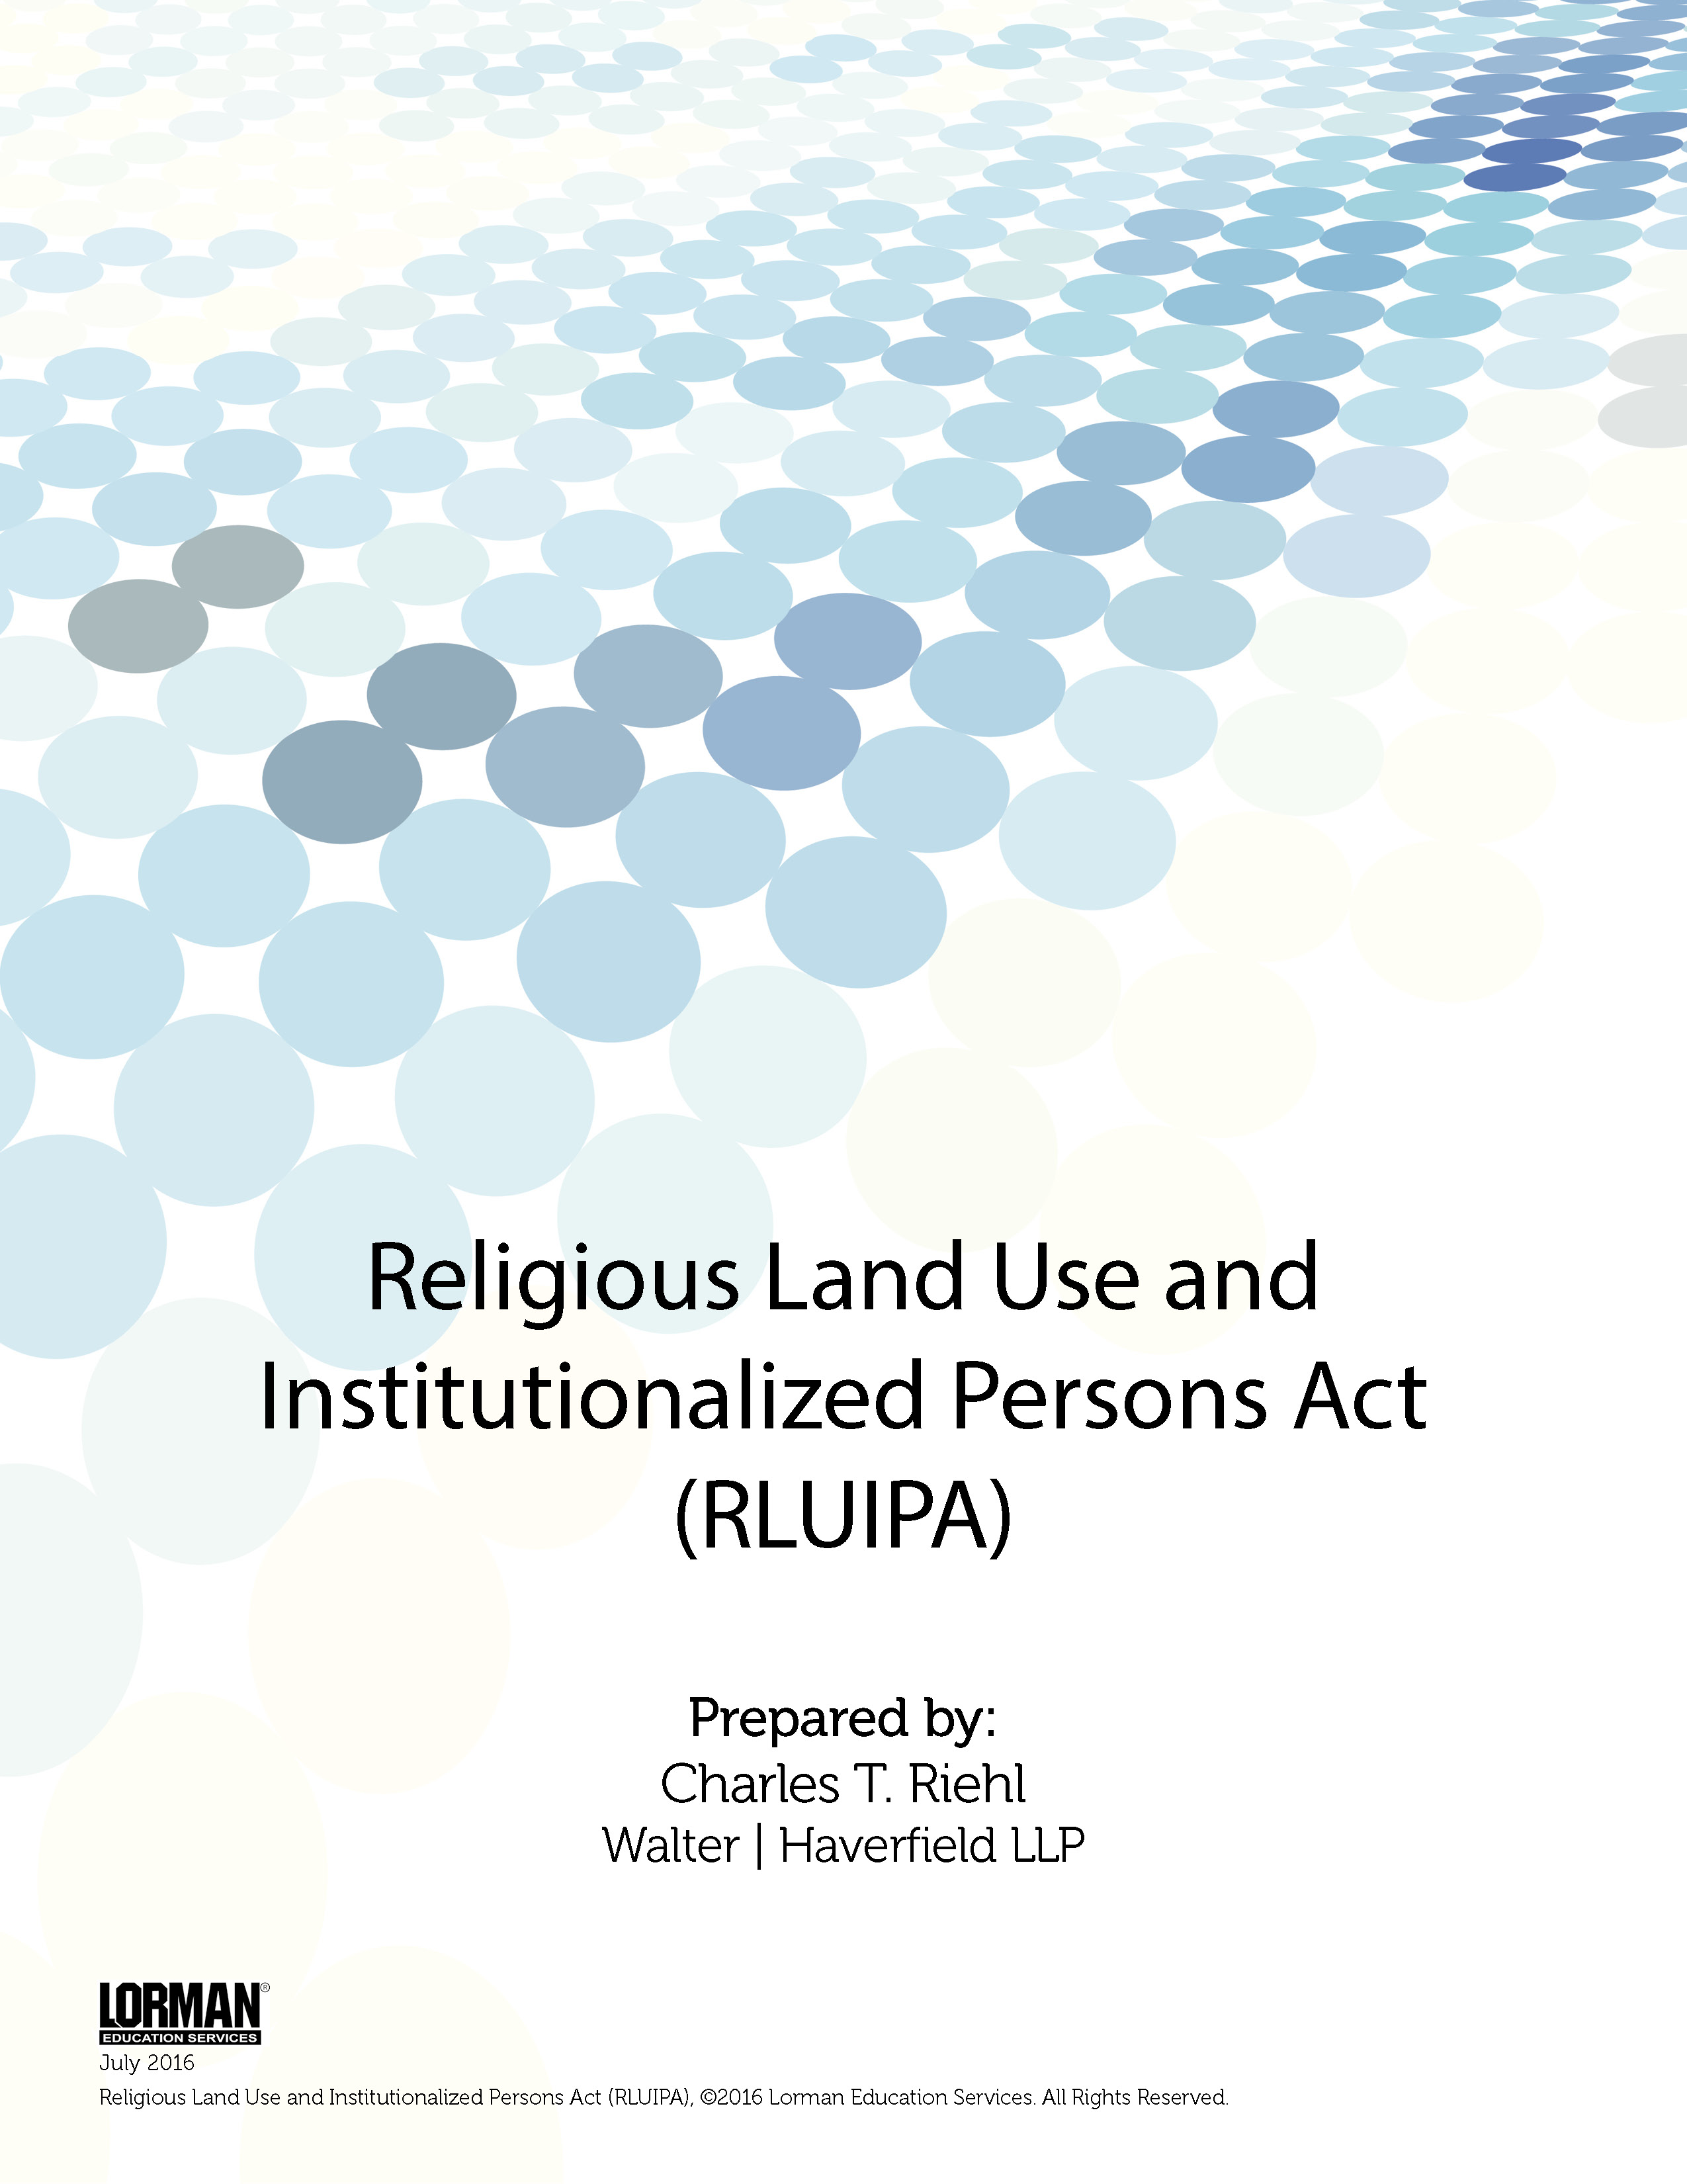 Religious Land Use and Institutionalized Persons Act (RLUIPA)